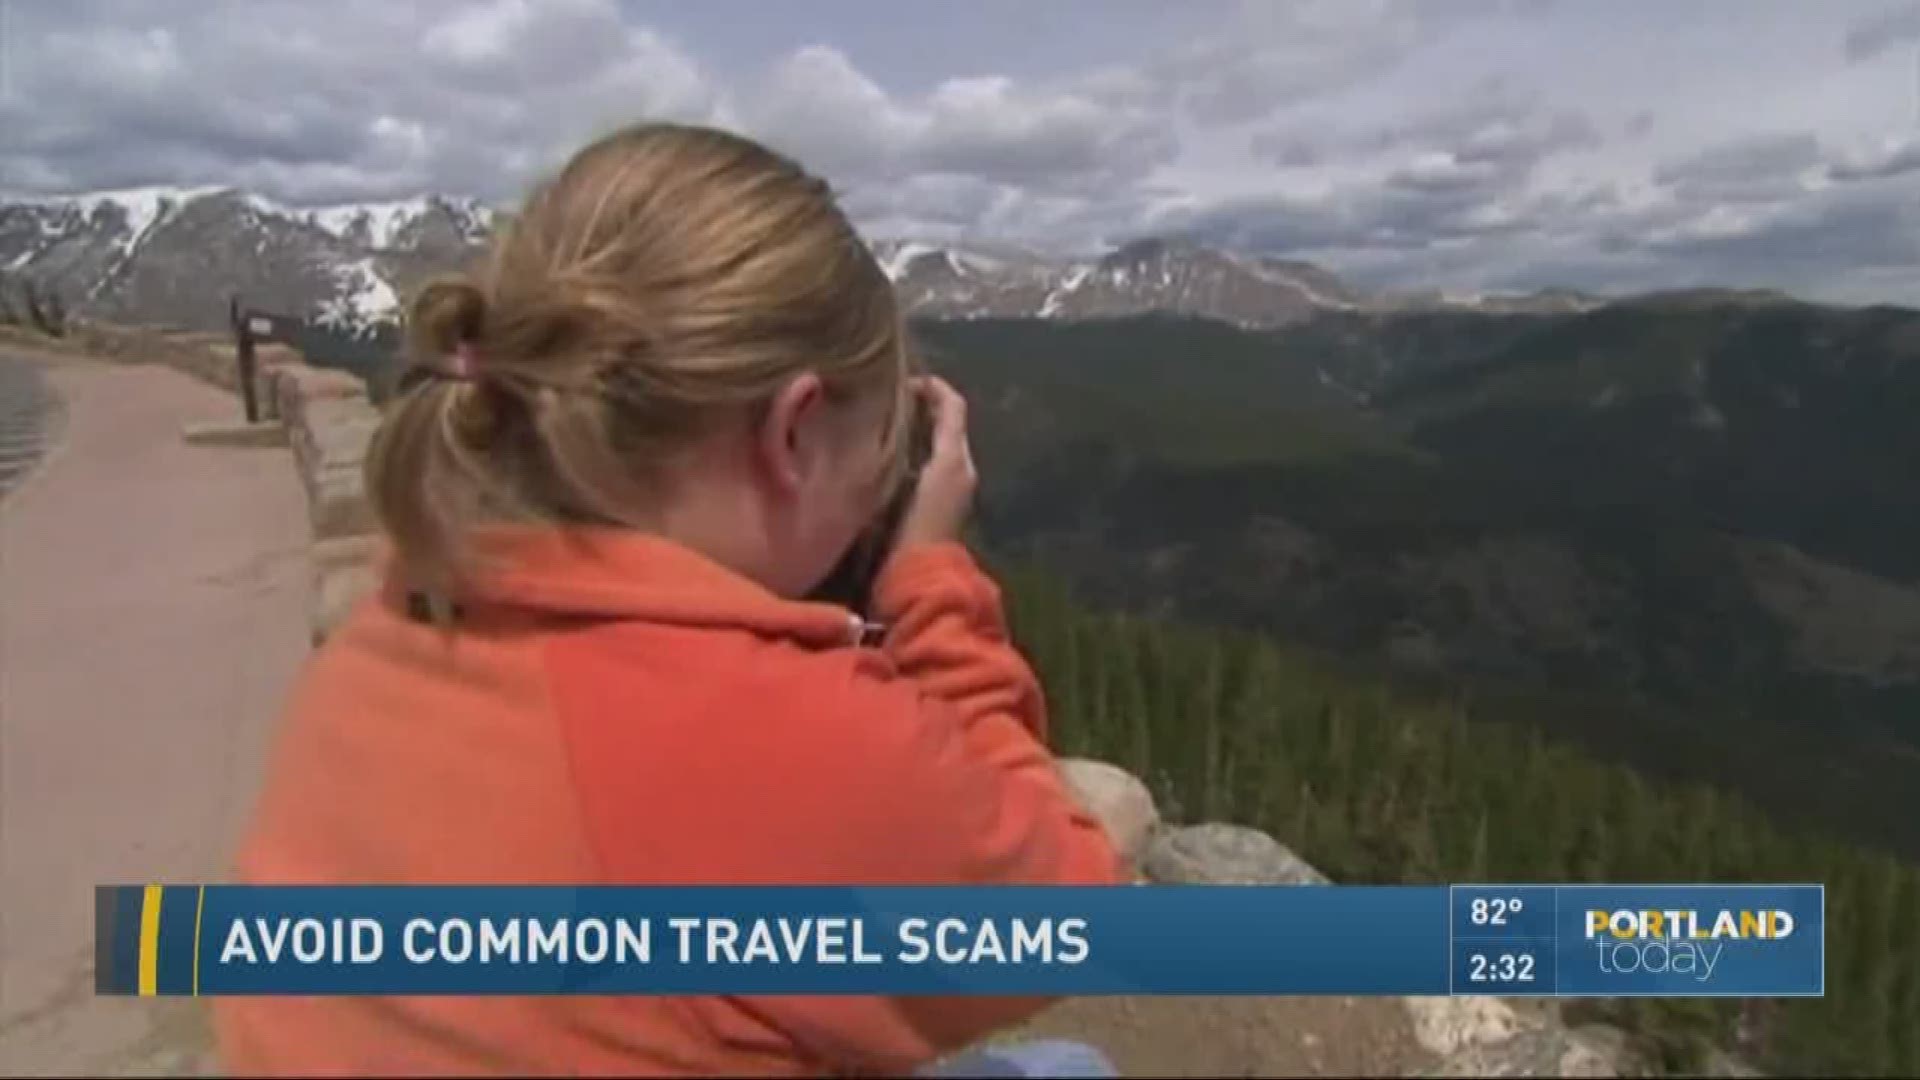 Avoid common travel scams